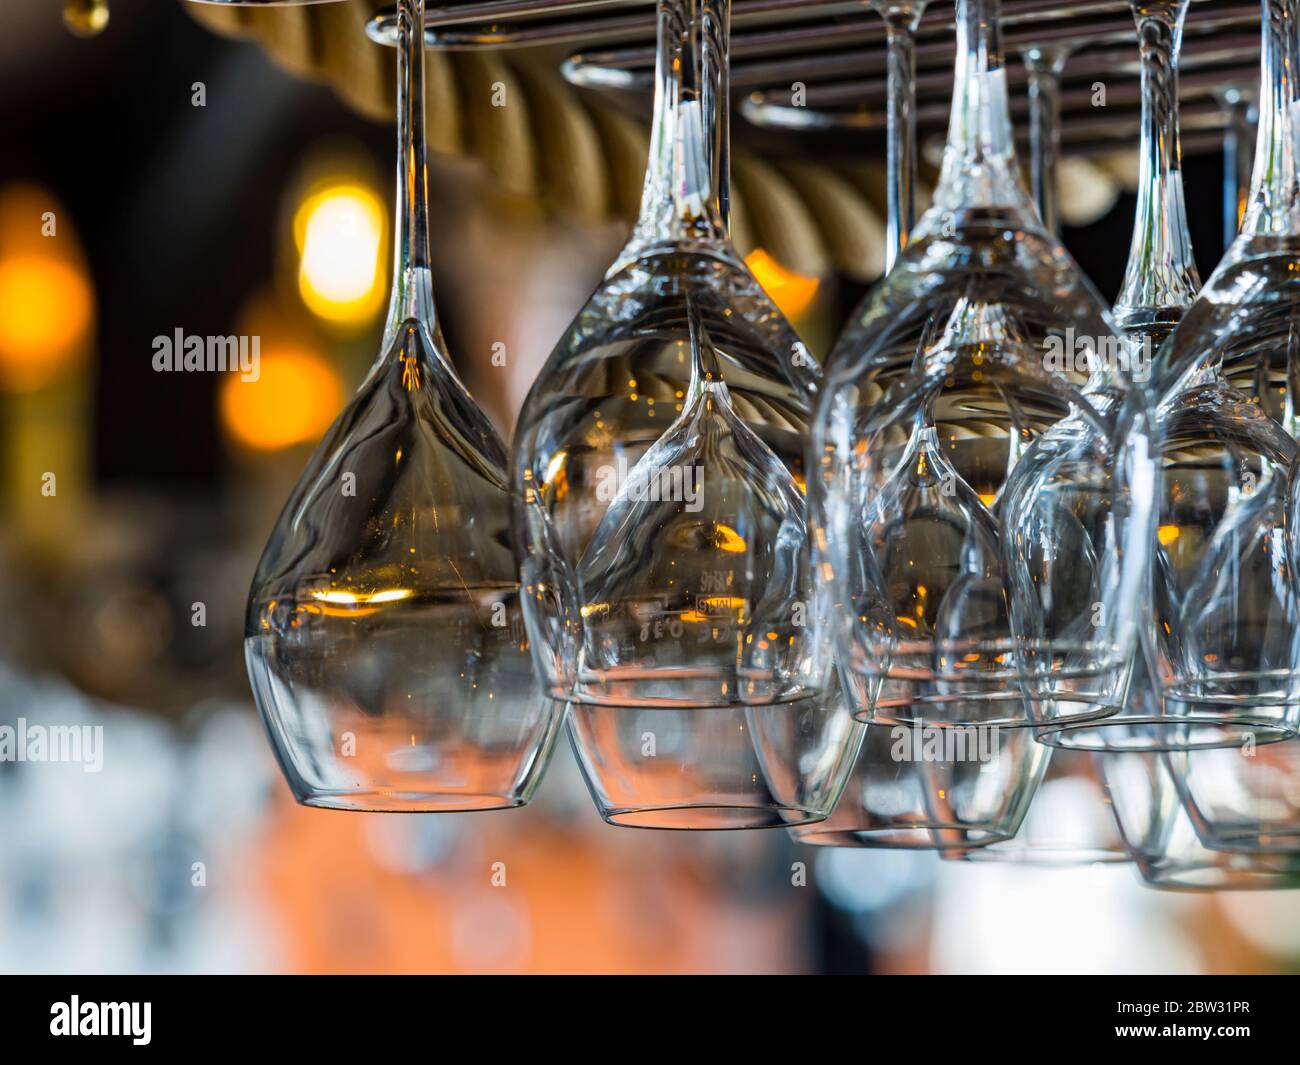 Many multiple bunch of drinking glasses empty ready clean washed cleaned hanging from above inverted in bar isolated Stock Photo